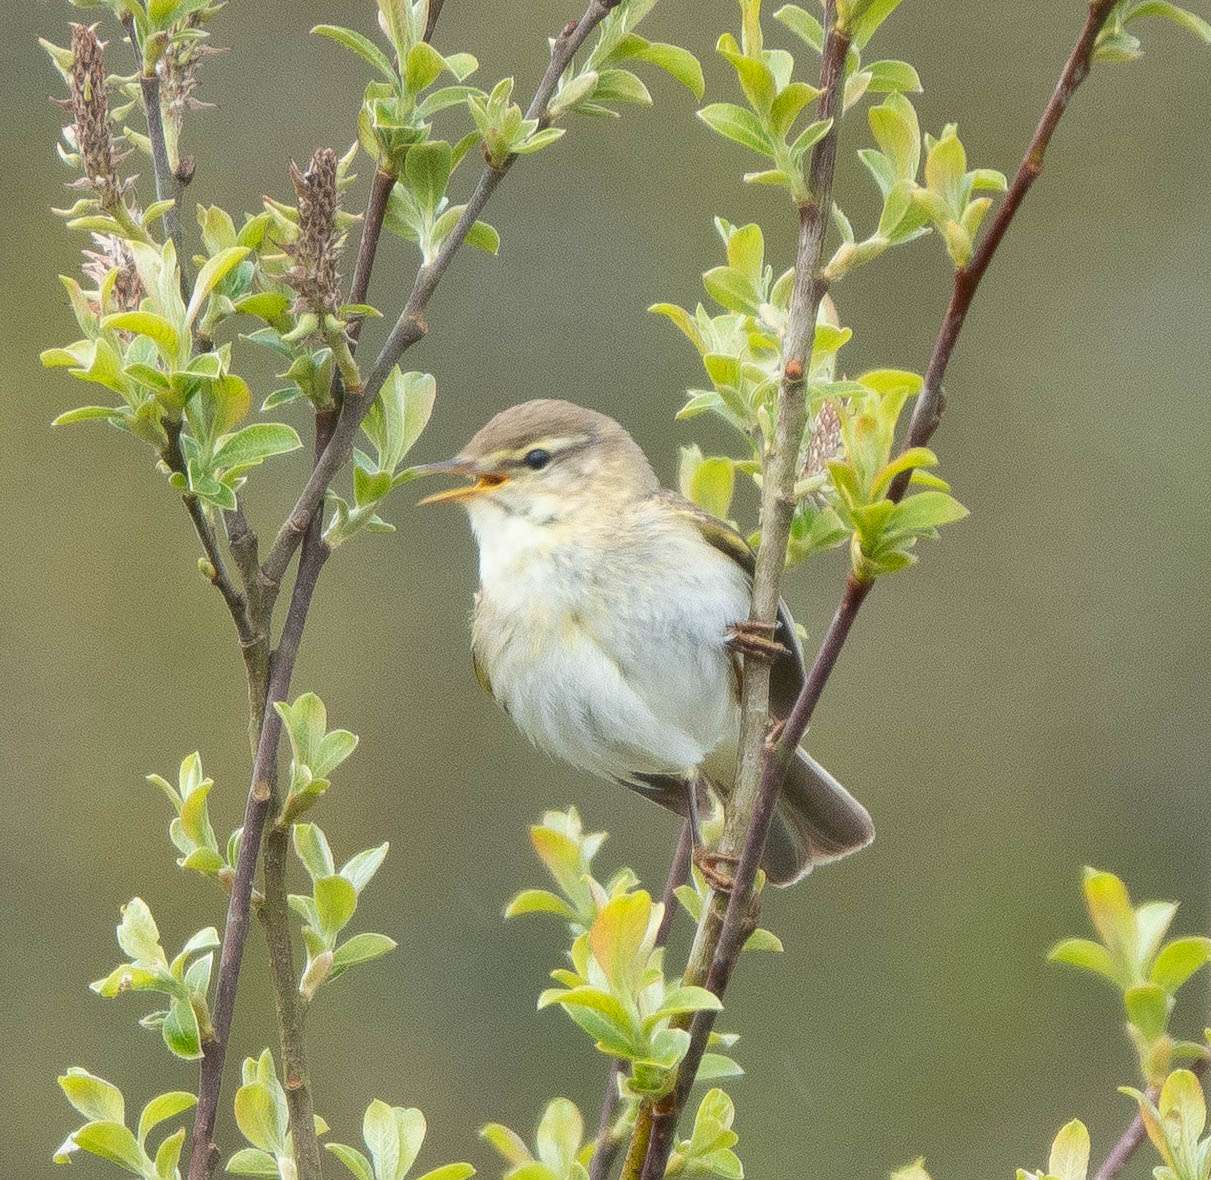 Willow Warbler by David Pakes at Nr Cator Court